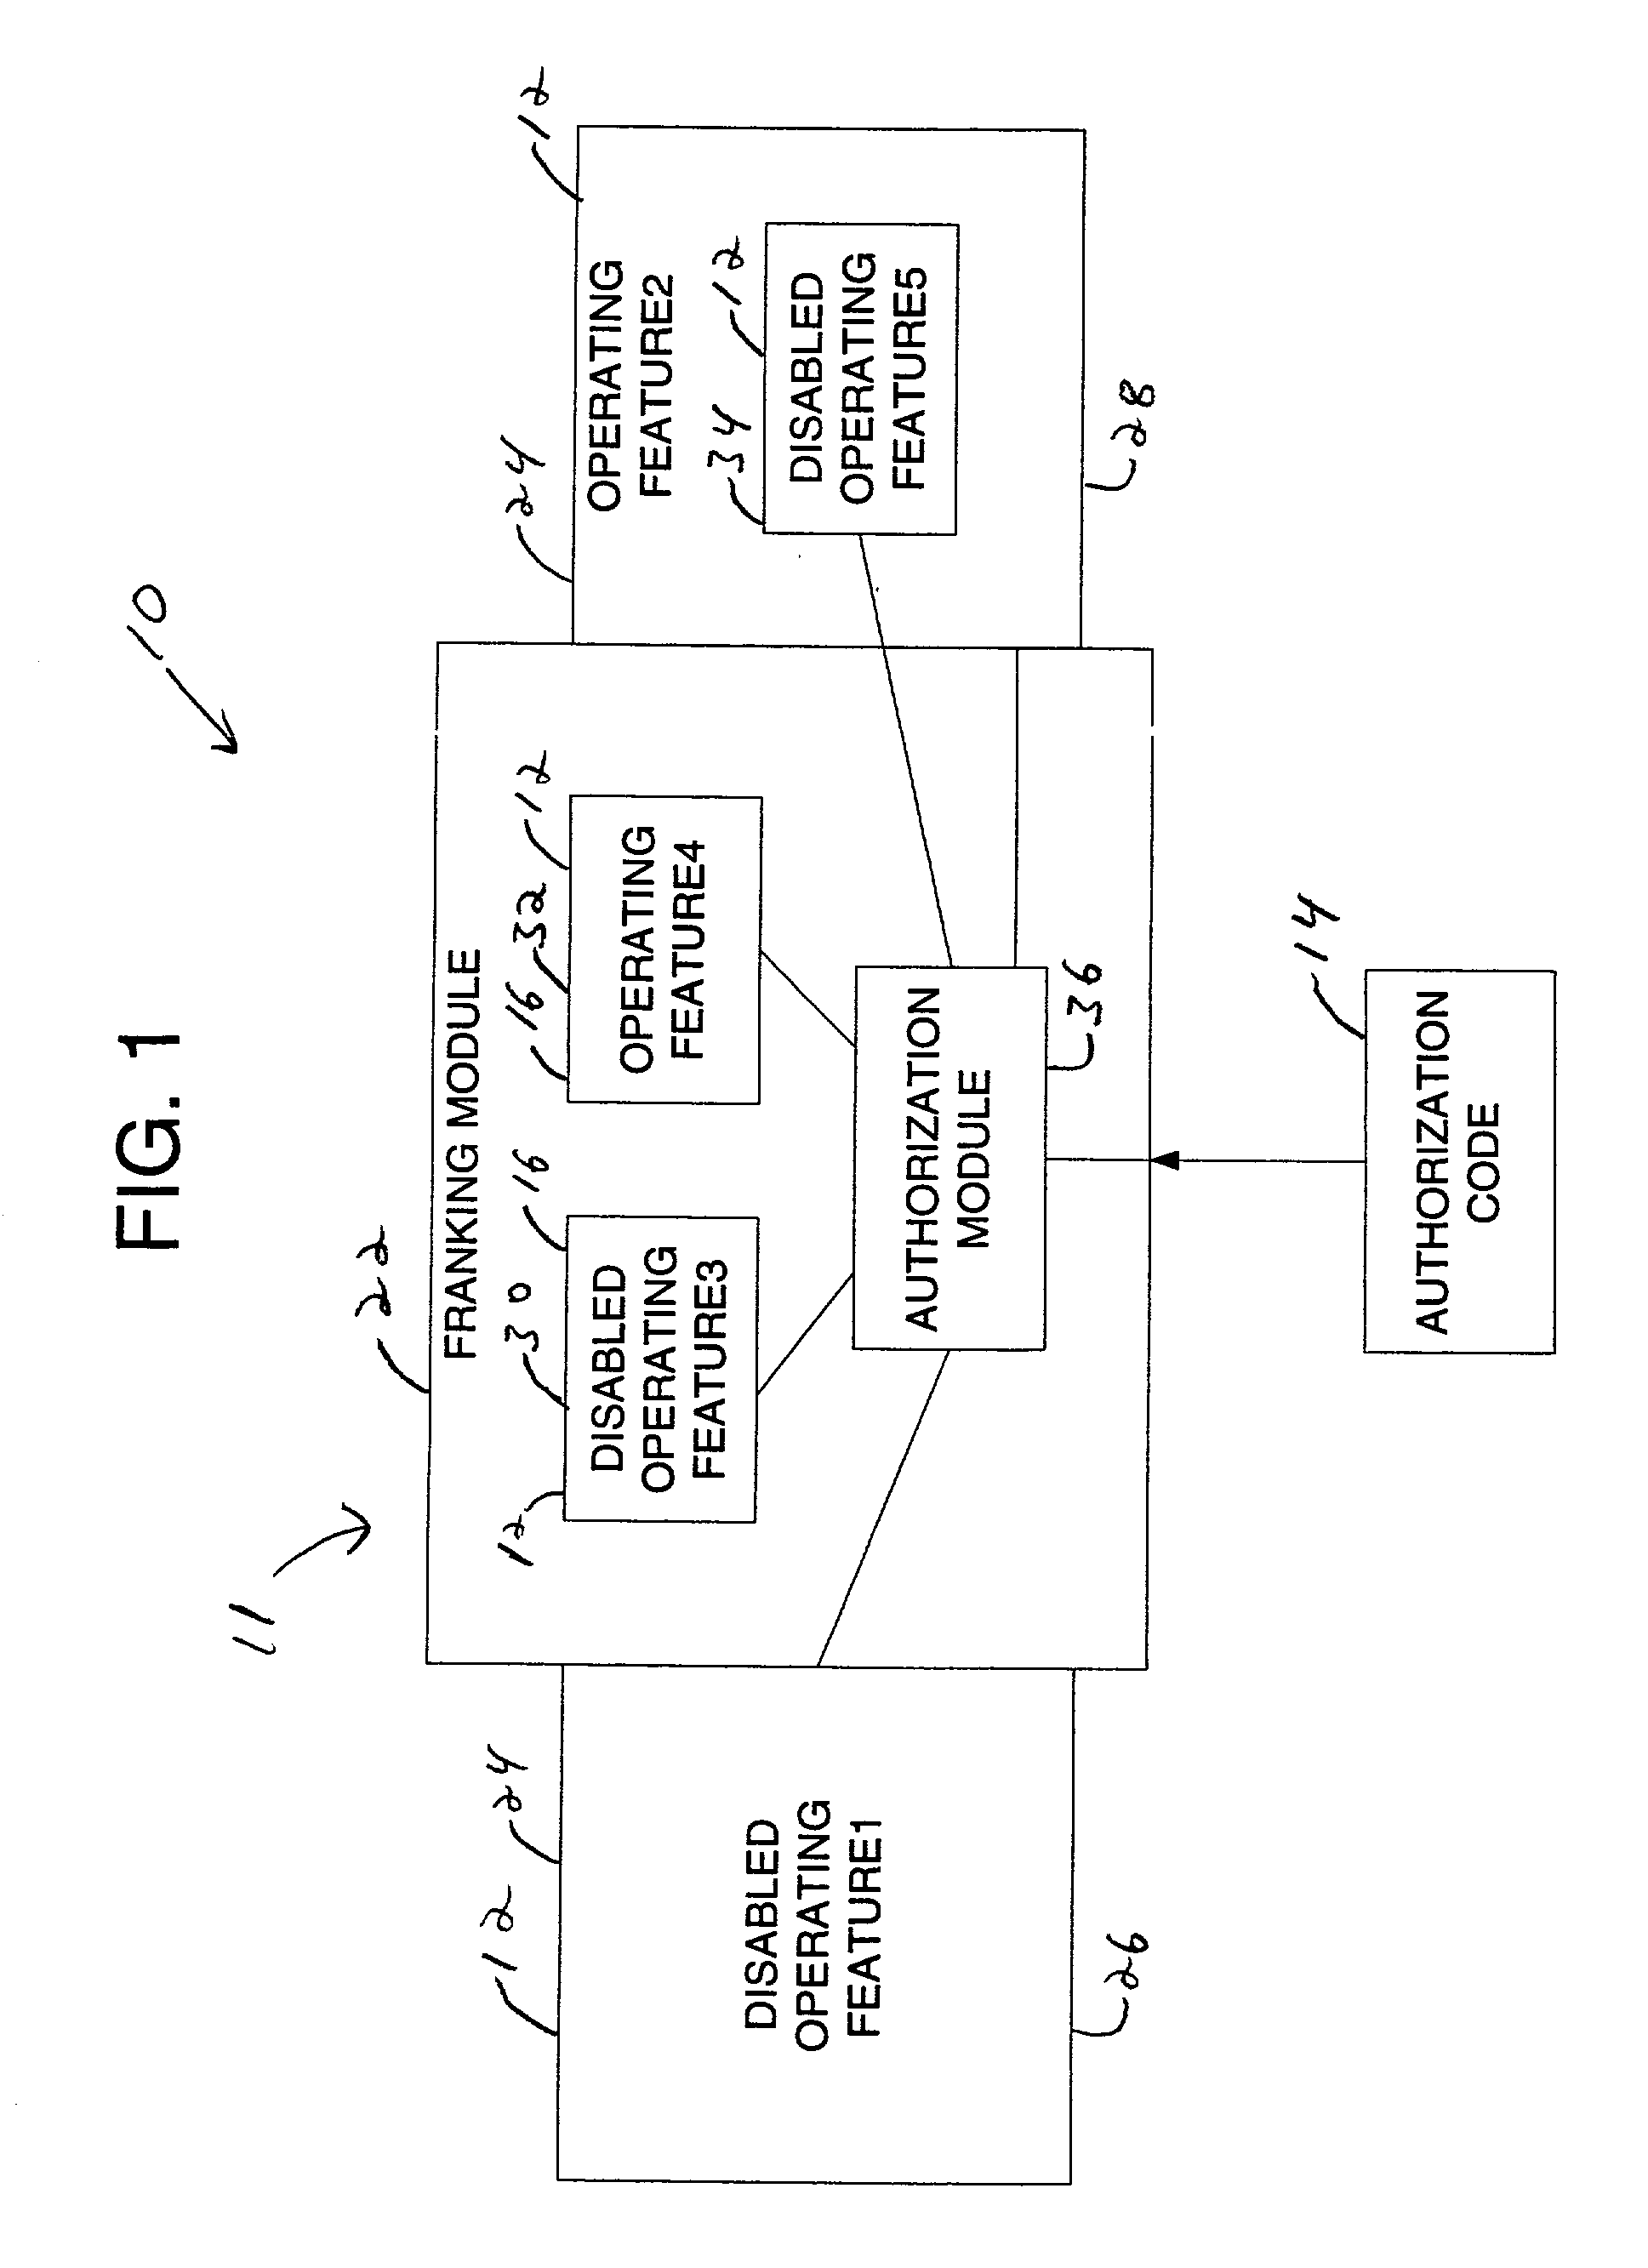 Configuration enablement of franking system